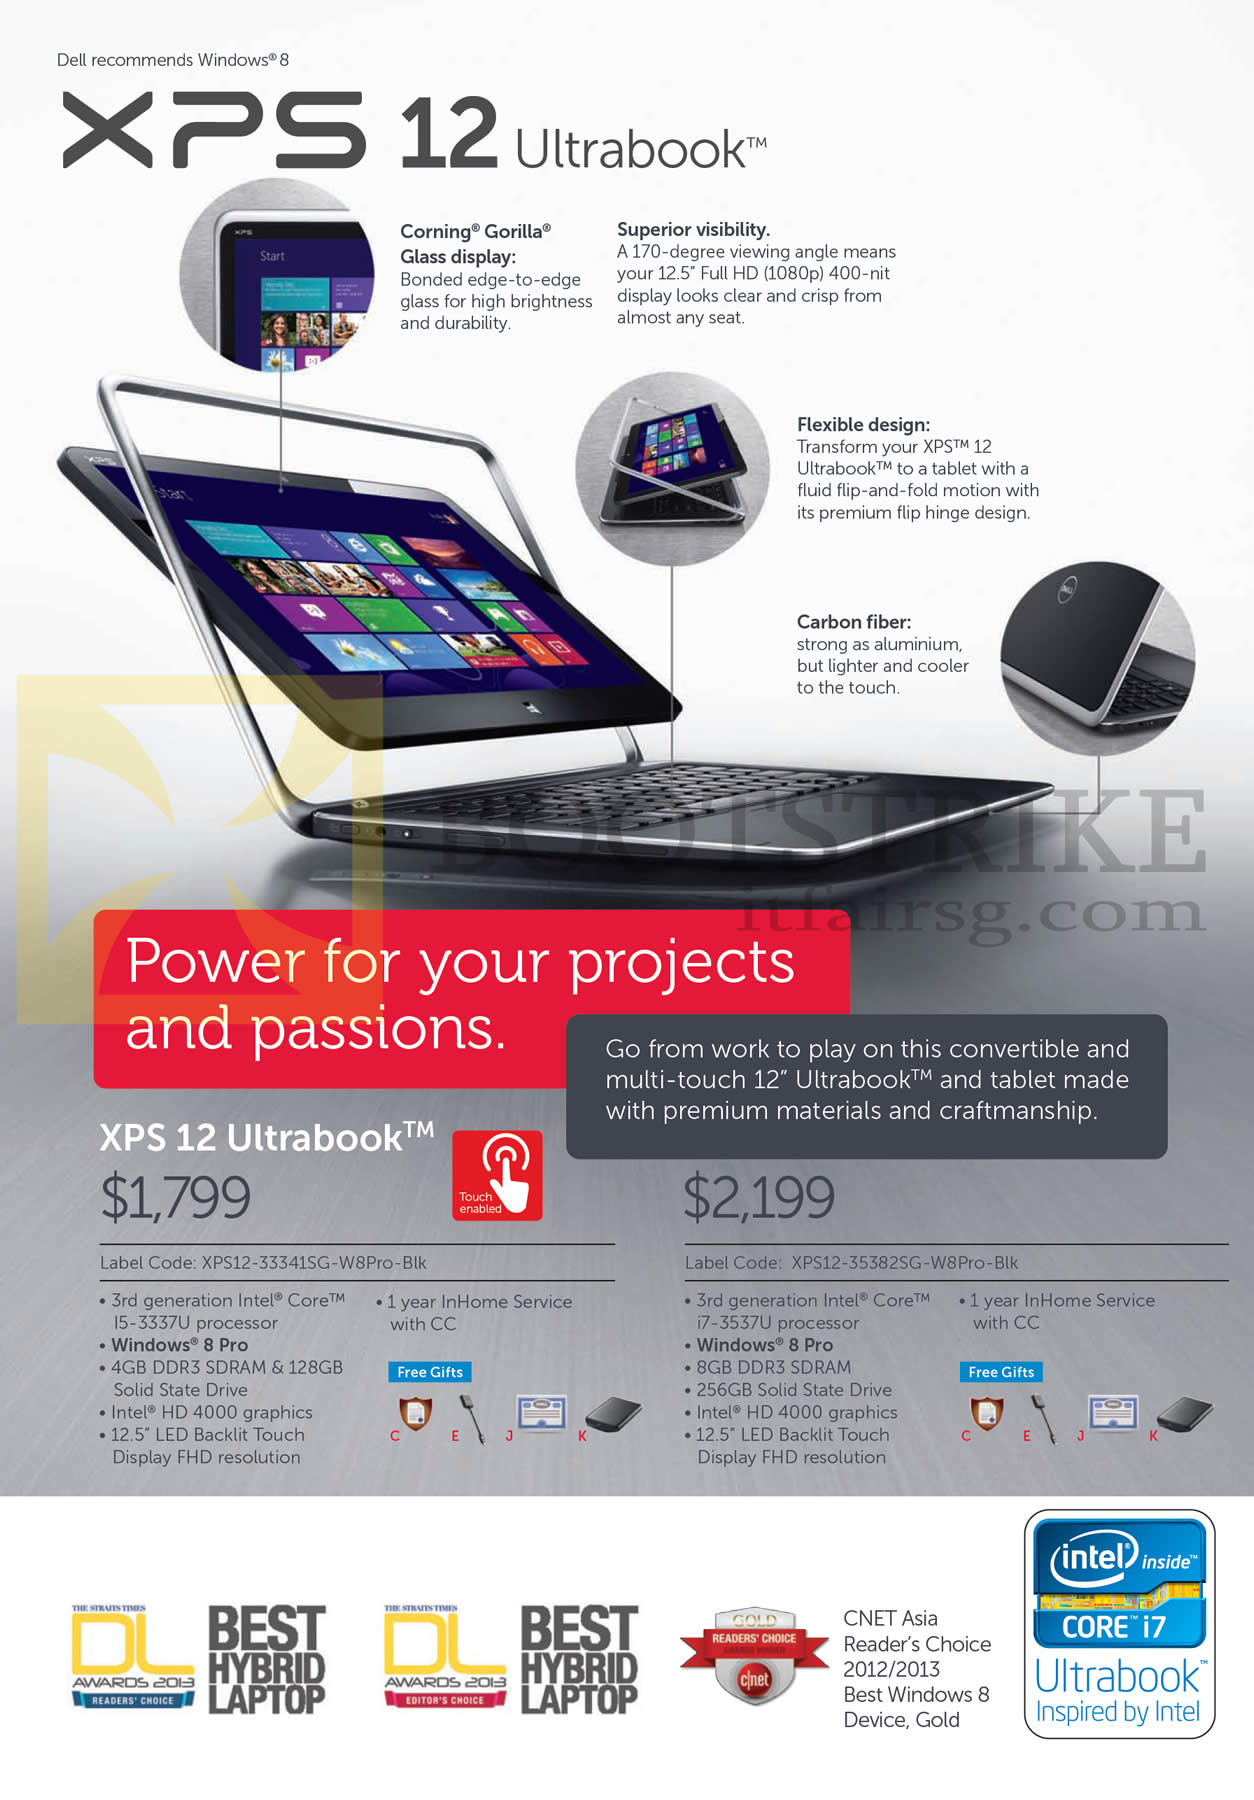 PC SHOW 2013 price list image brochure of Dell XPS 12 Ultrabook Notebook